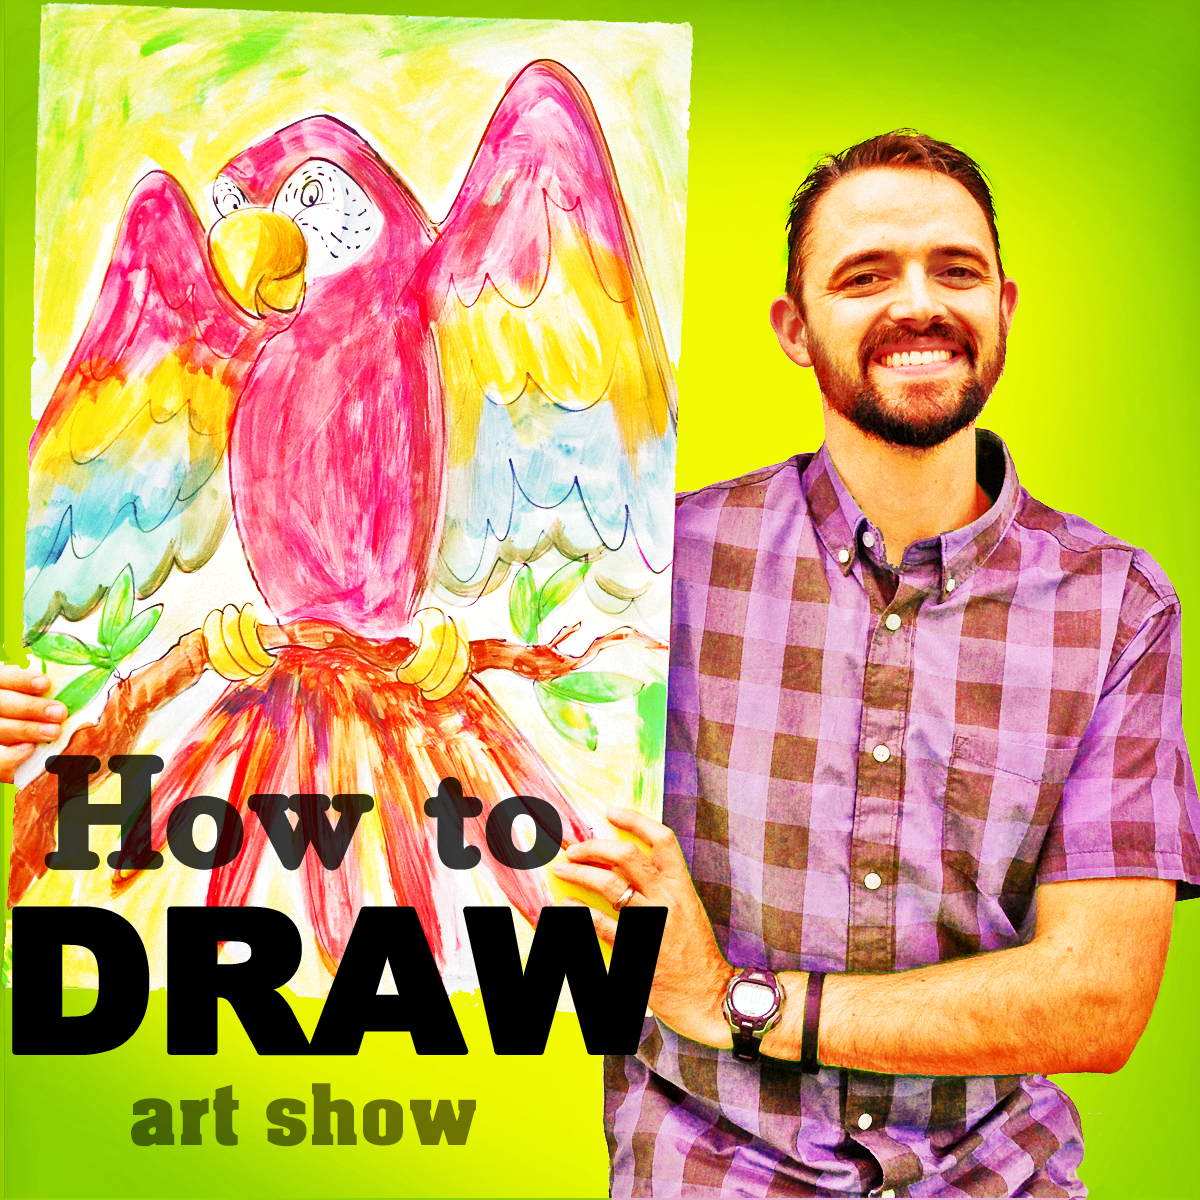 How to Draw Show 5 Dan Gogh's Magic and Art